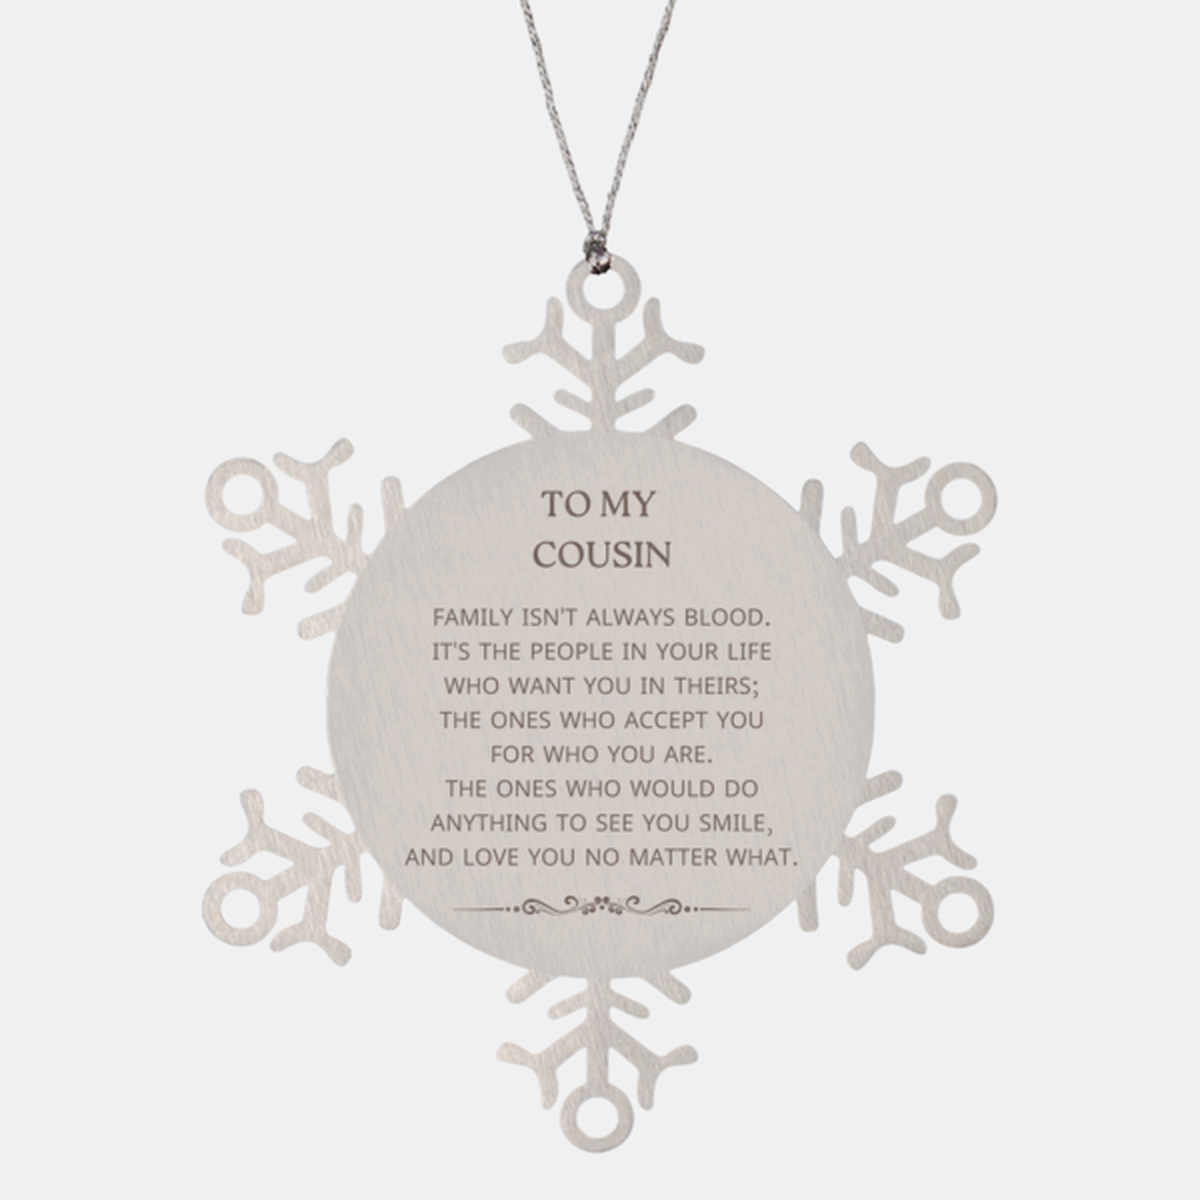 To My Cousin Gifts, Family isn't always blood, Cousin Snowflake Ornament, Birthday Christmas Unique Present For Cousin